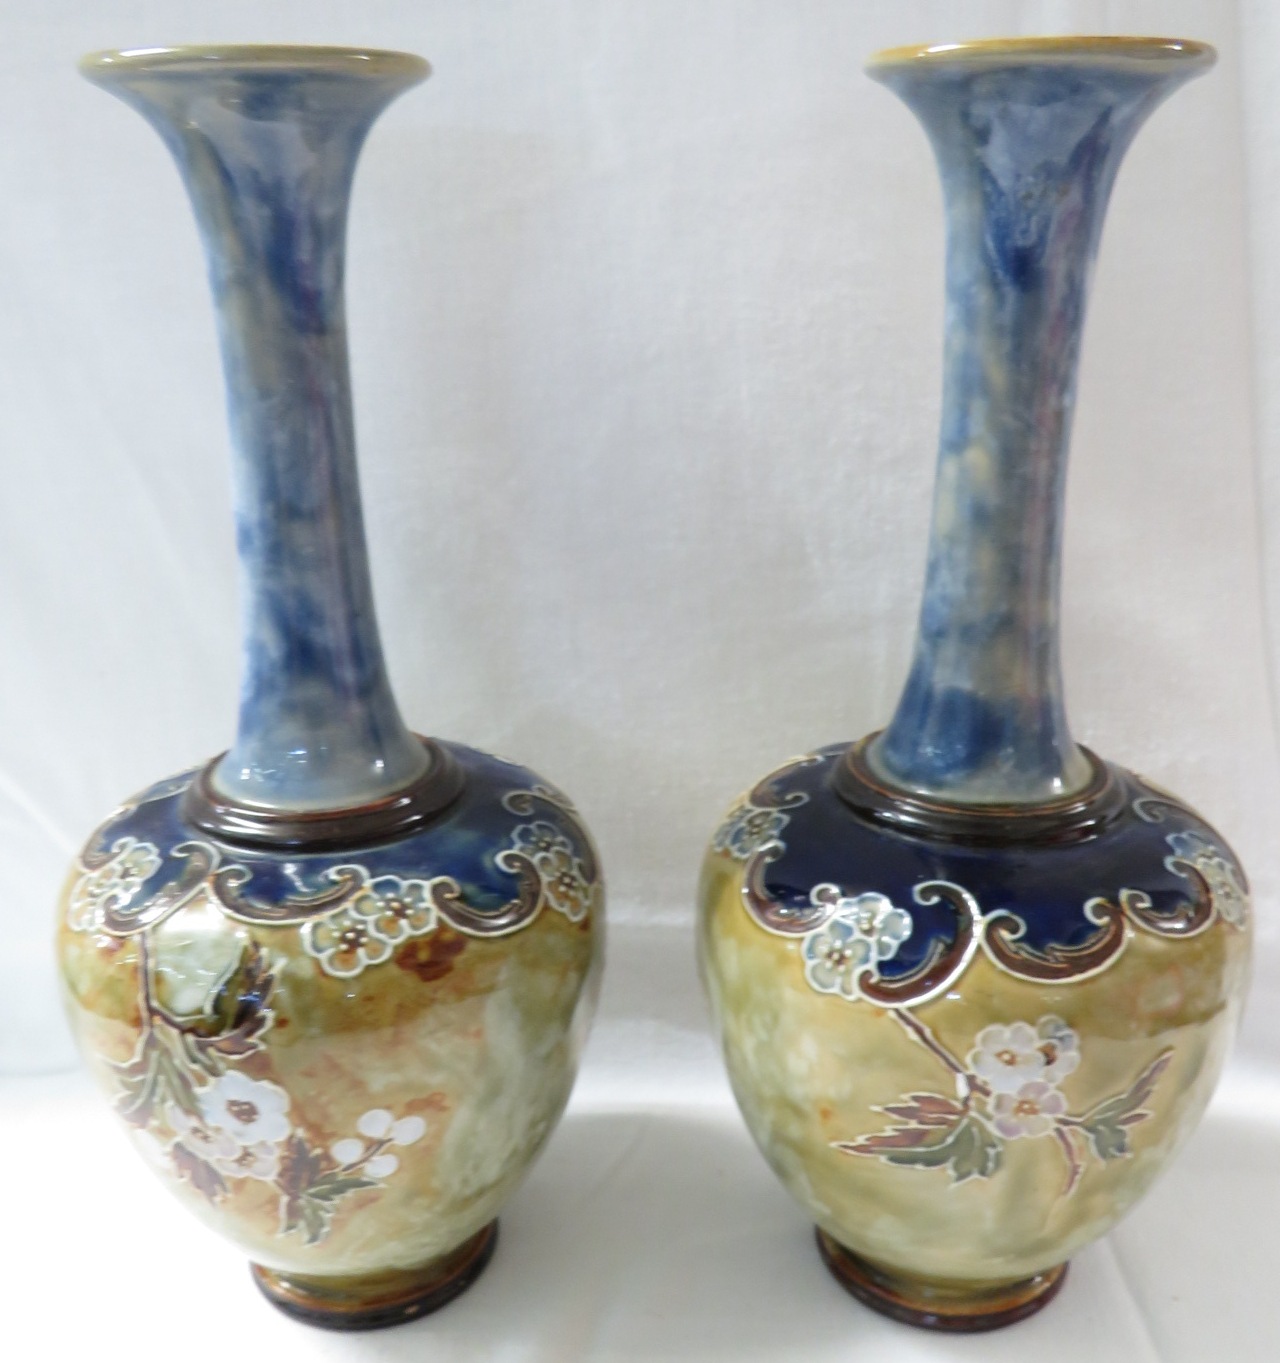 Pair of Royal Doulton bottle vases, pale blue glazed neck, the bodies with tubed line decoration